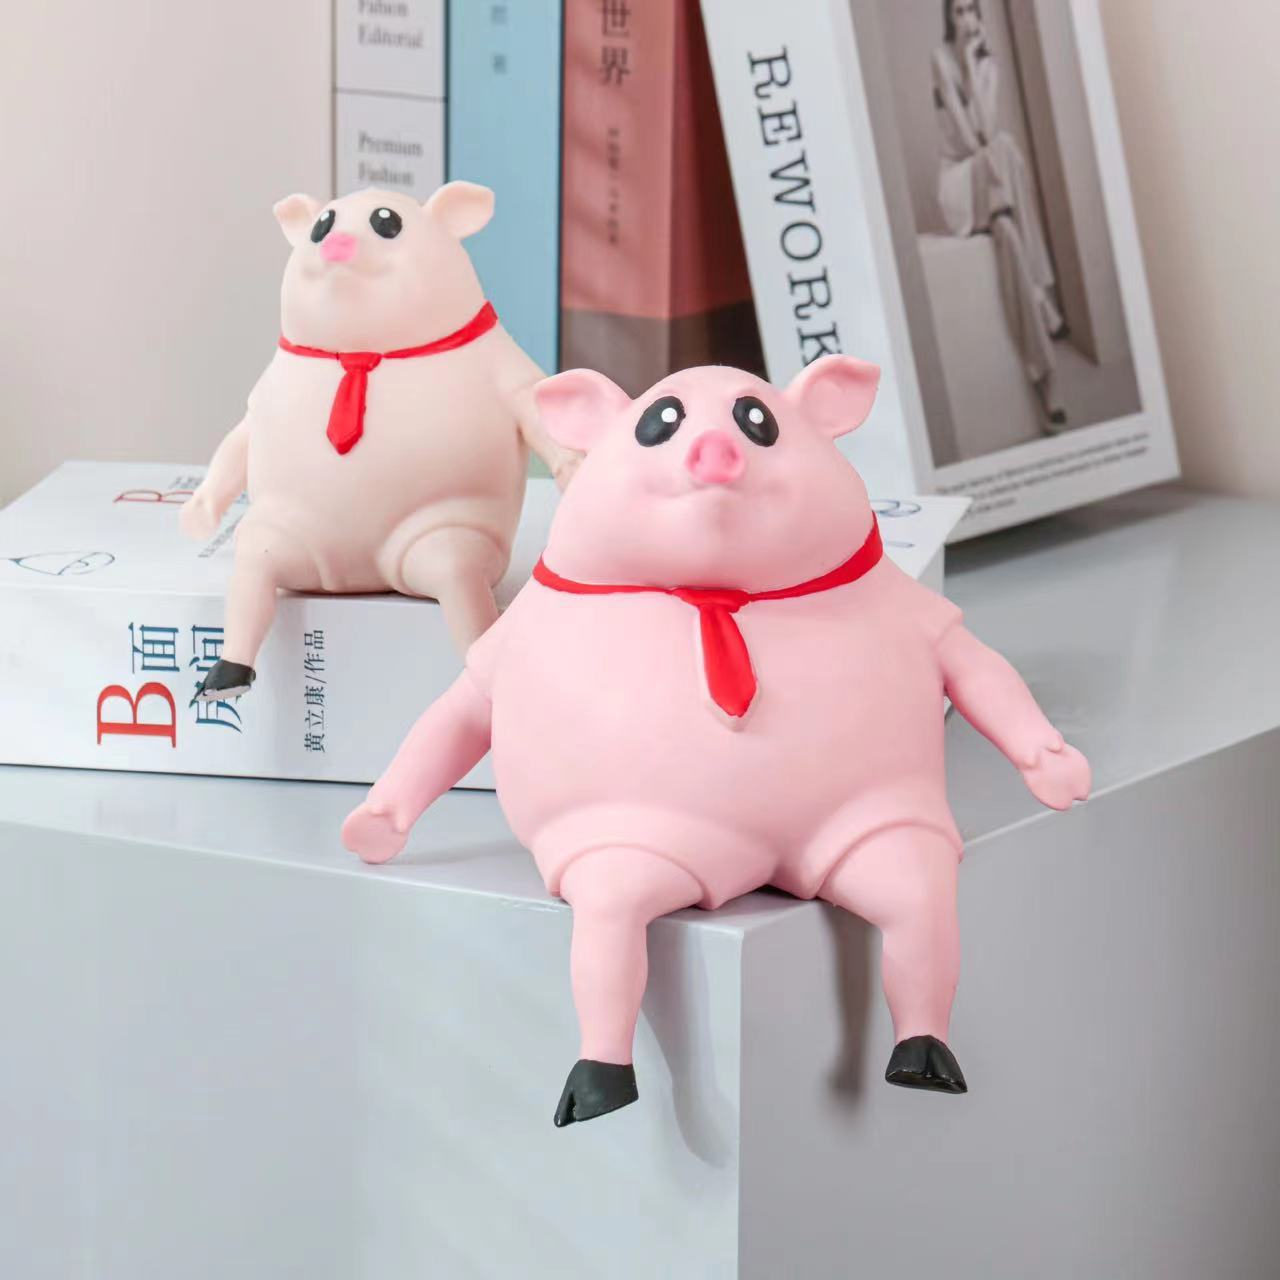 Piggy Squeeze Toys  Pigs Antistress Toy Cute Squeeze Animals Lovely Piggy Doll Stress Relief Toy Children Day For Kids Gift Gifts